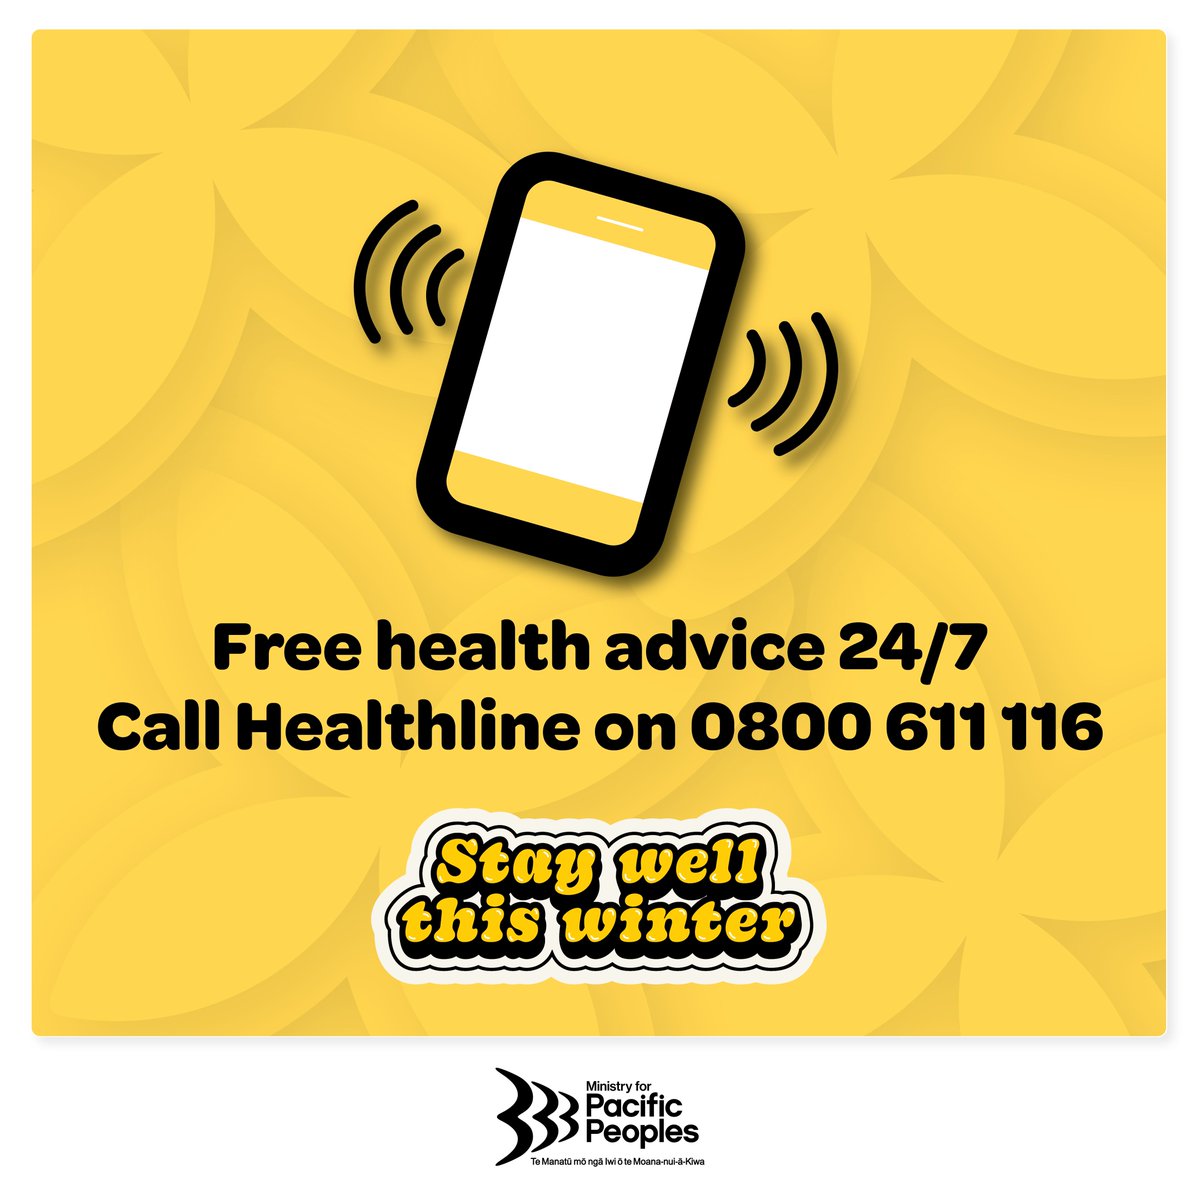 No need for DR Google when you have Healthline! 🔍💻👨‍⚕️ If you need free health advice, call Healthline. ☎️🩺 Stay well and stay safe! 🌟🏥💙 Resources available in 9 Pacific languages on our website mpp.govt.nz/emergency-resp…